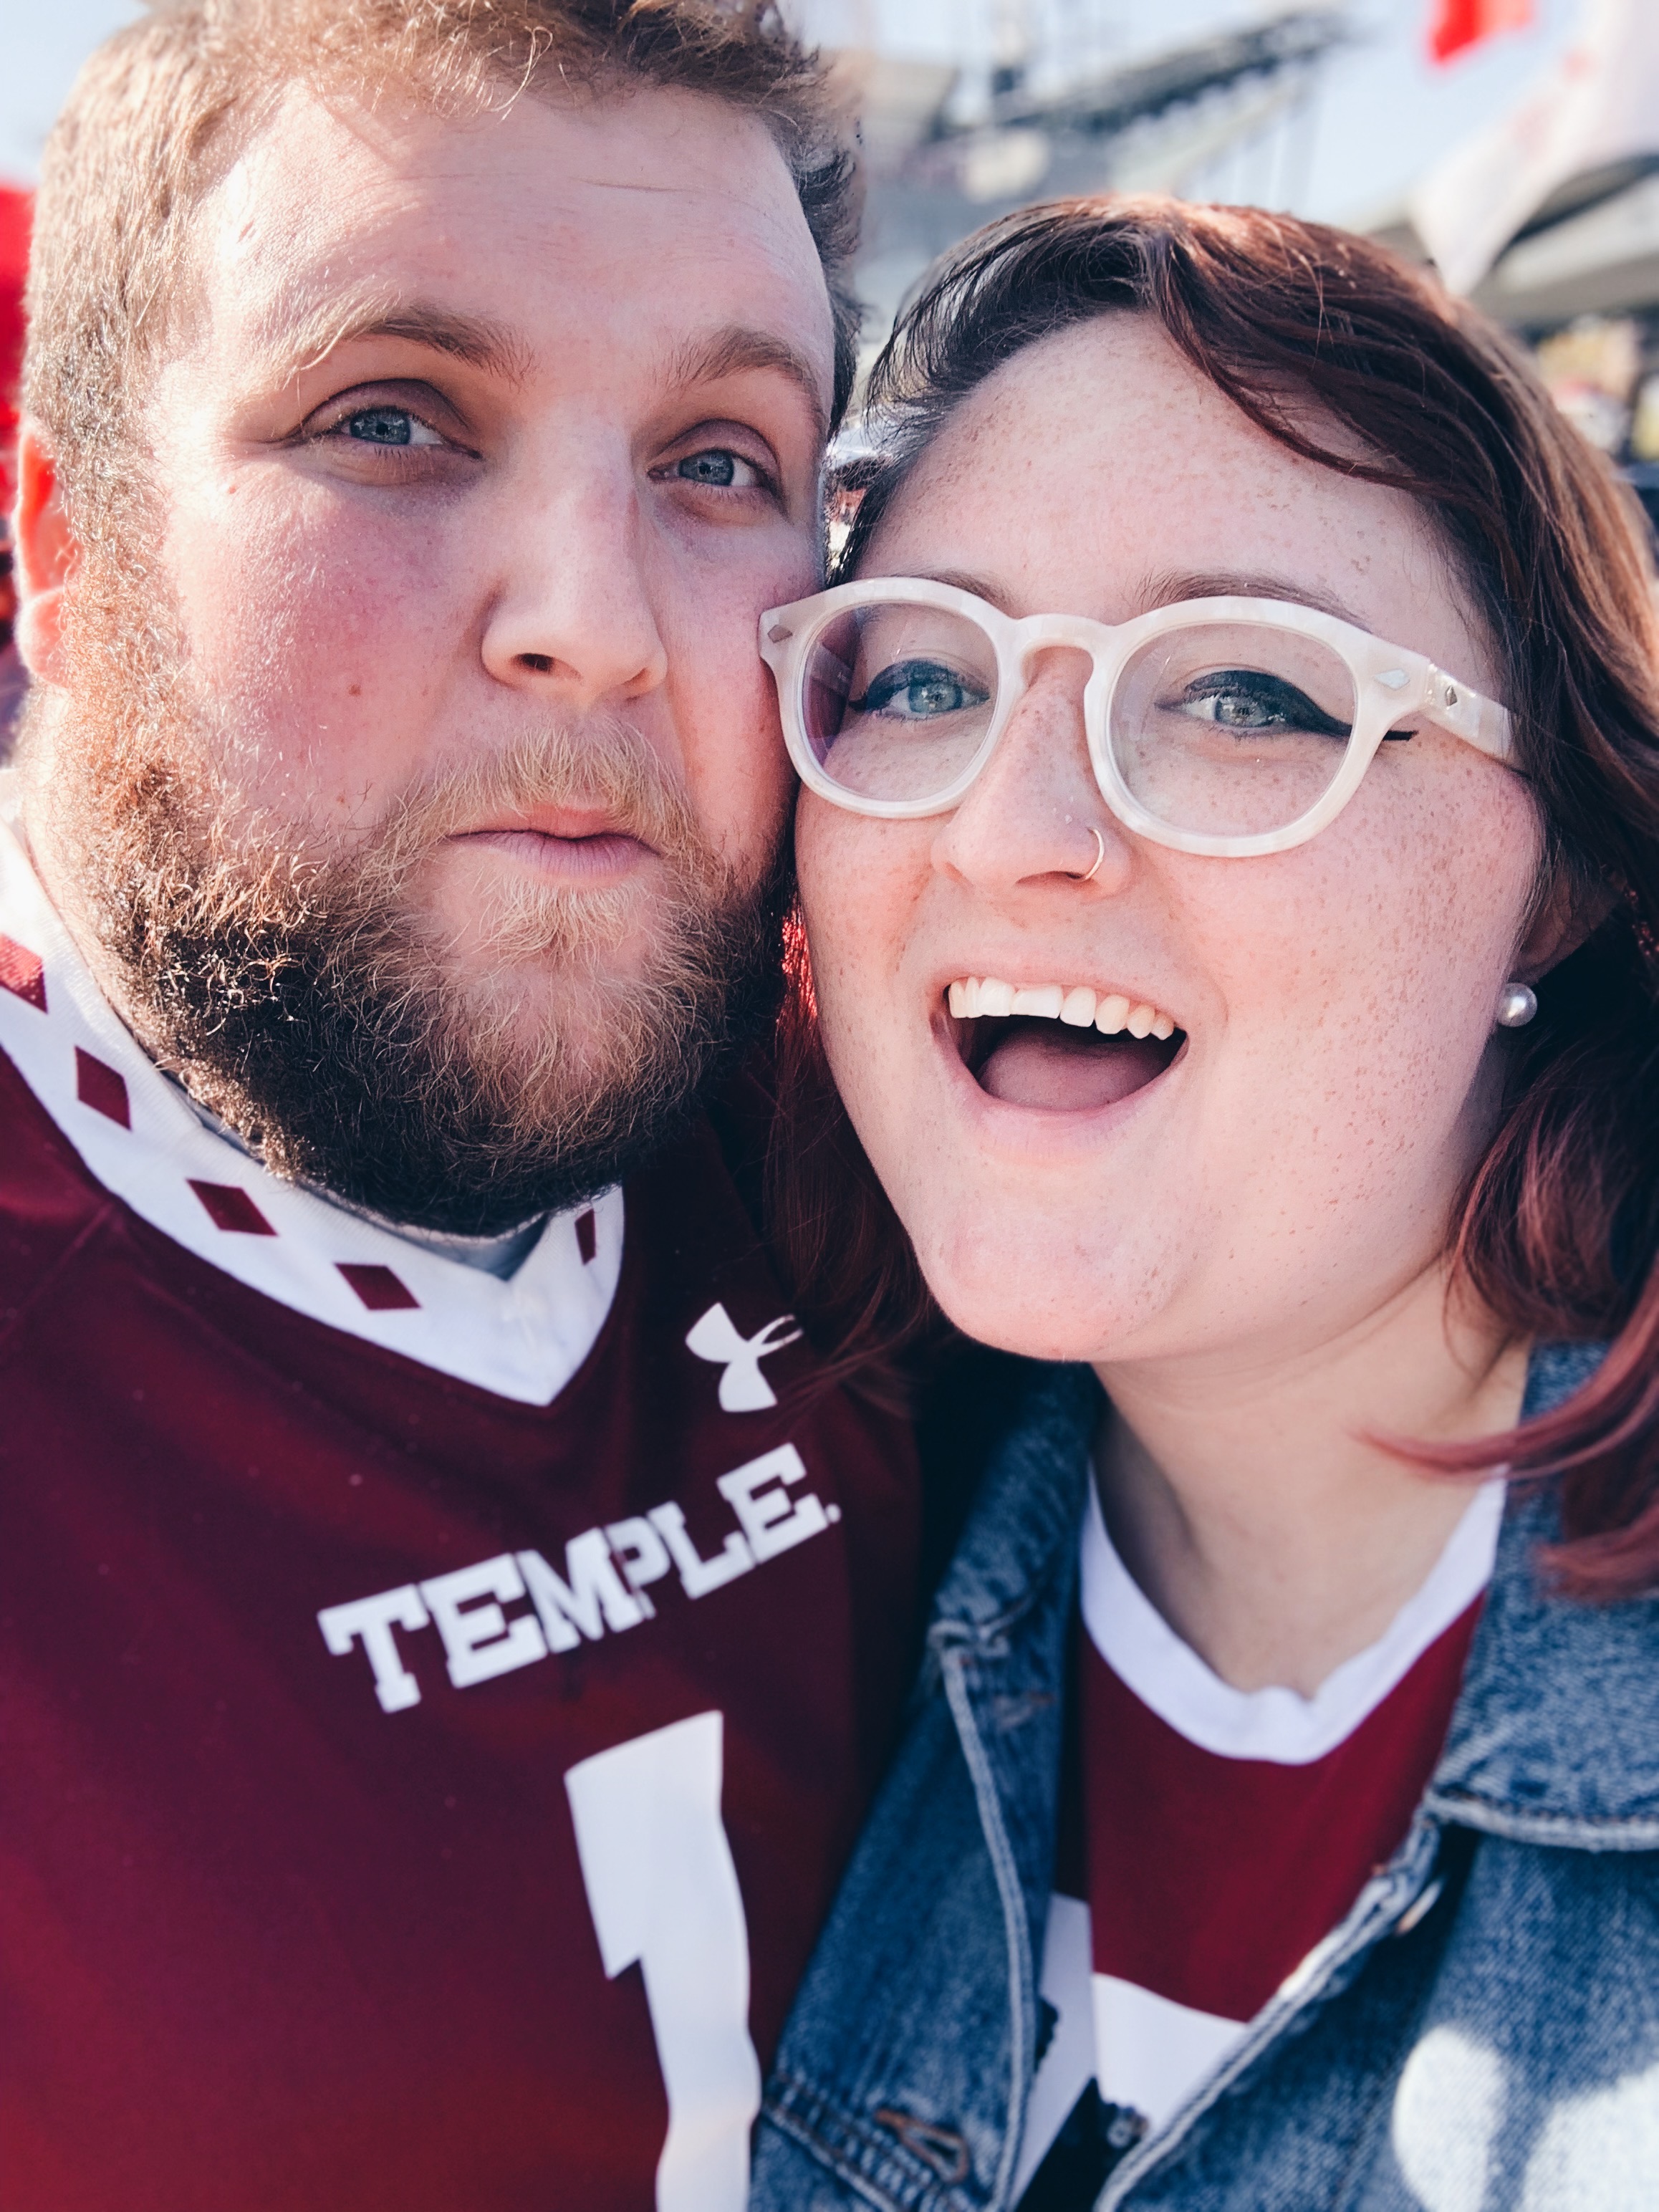 couple at temple football game